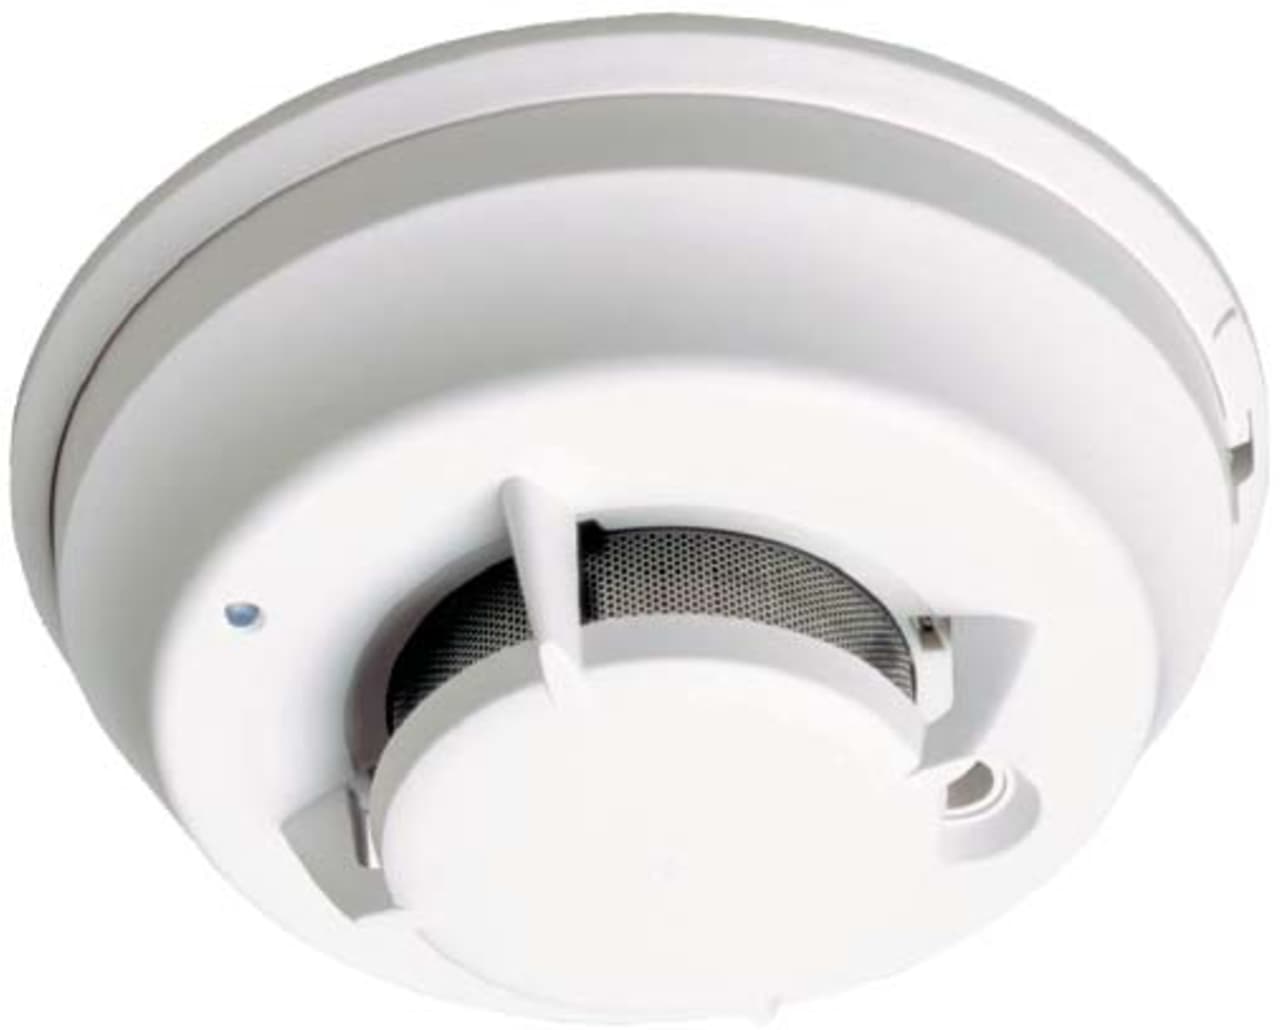 Call the American Red Cross to make an appointment to have a free smoke alarm installed in your Norwalk home on March 7.